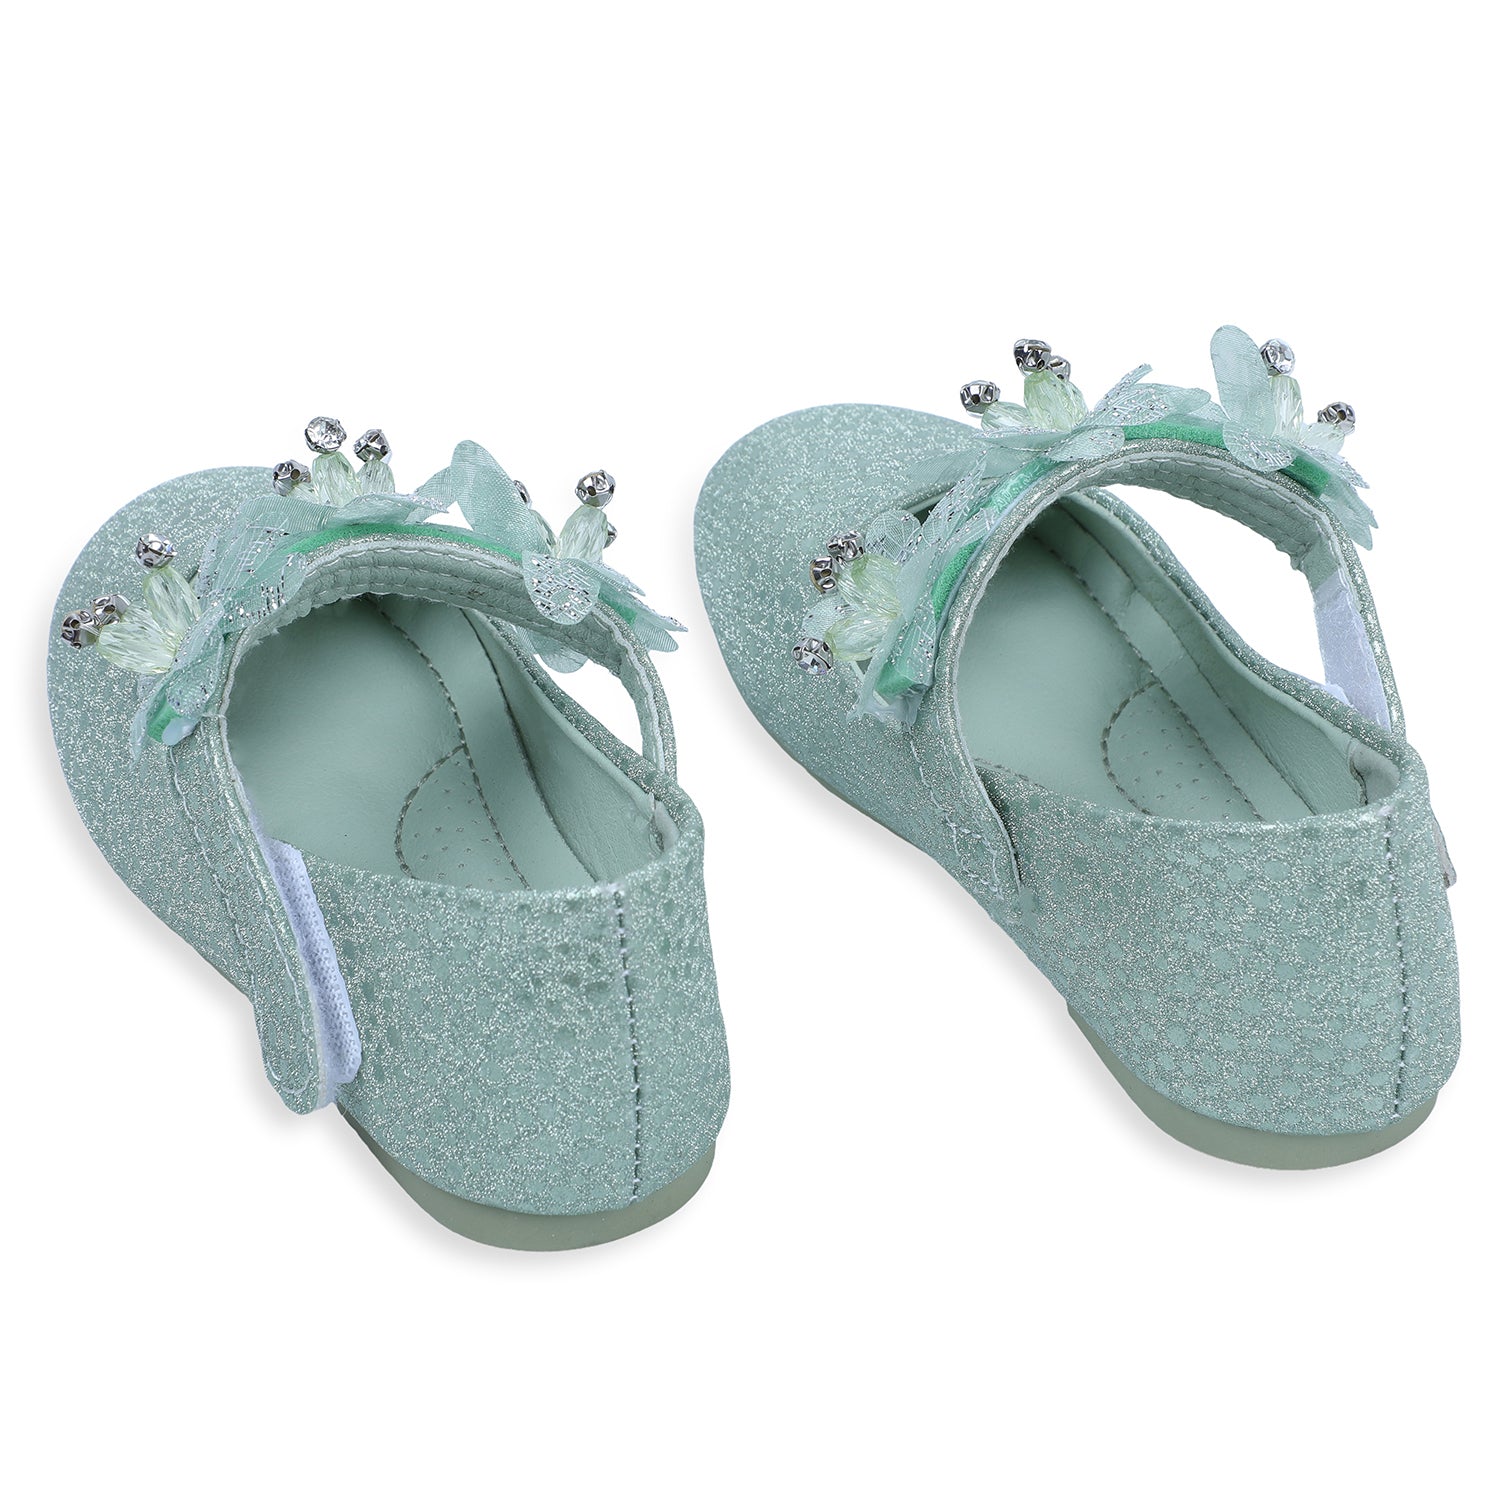 Baby Moo x Bash Kids Ethnic Party Floral Applique Mary Jane Ballerinas - Green